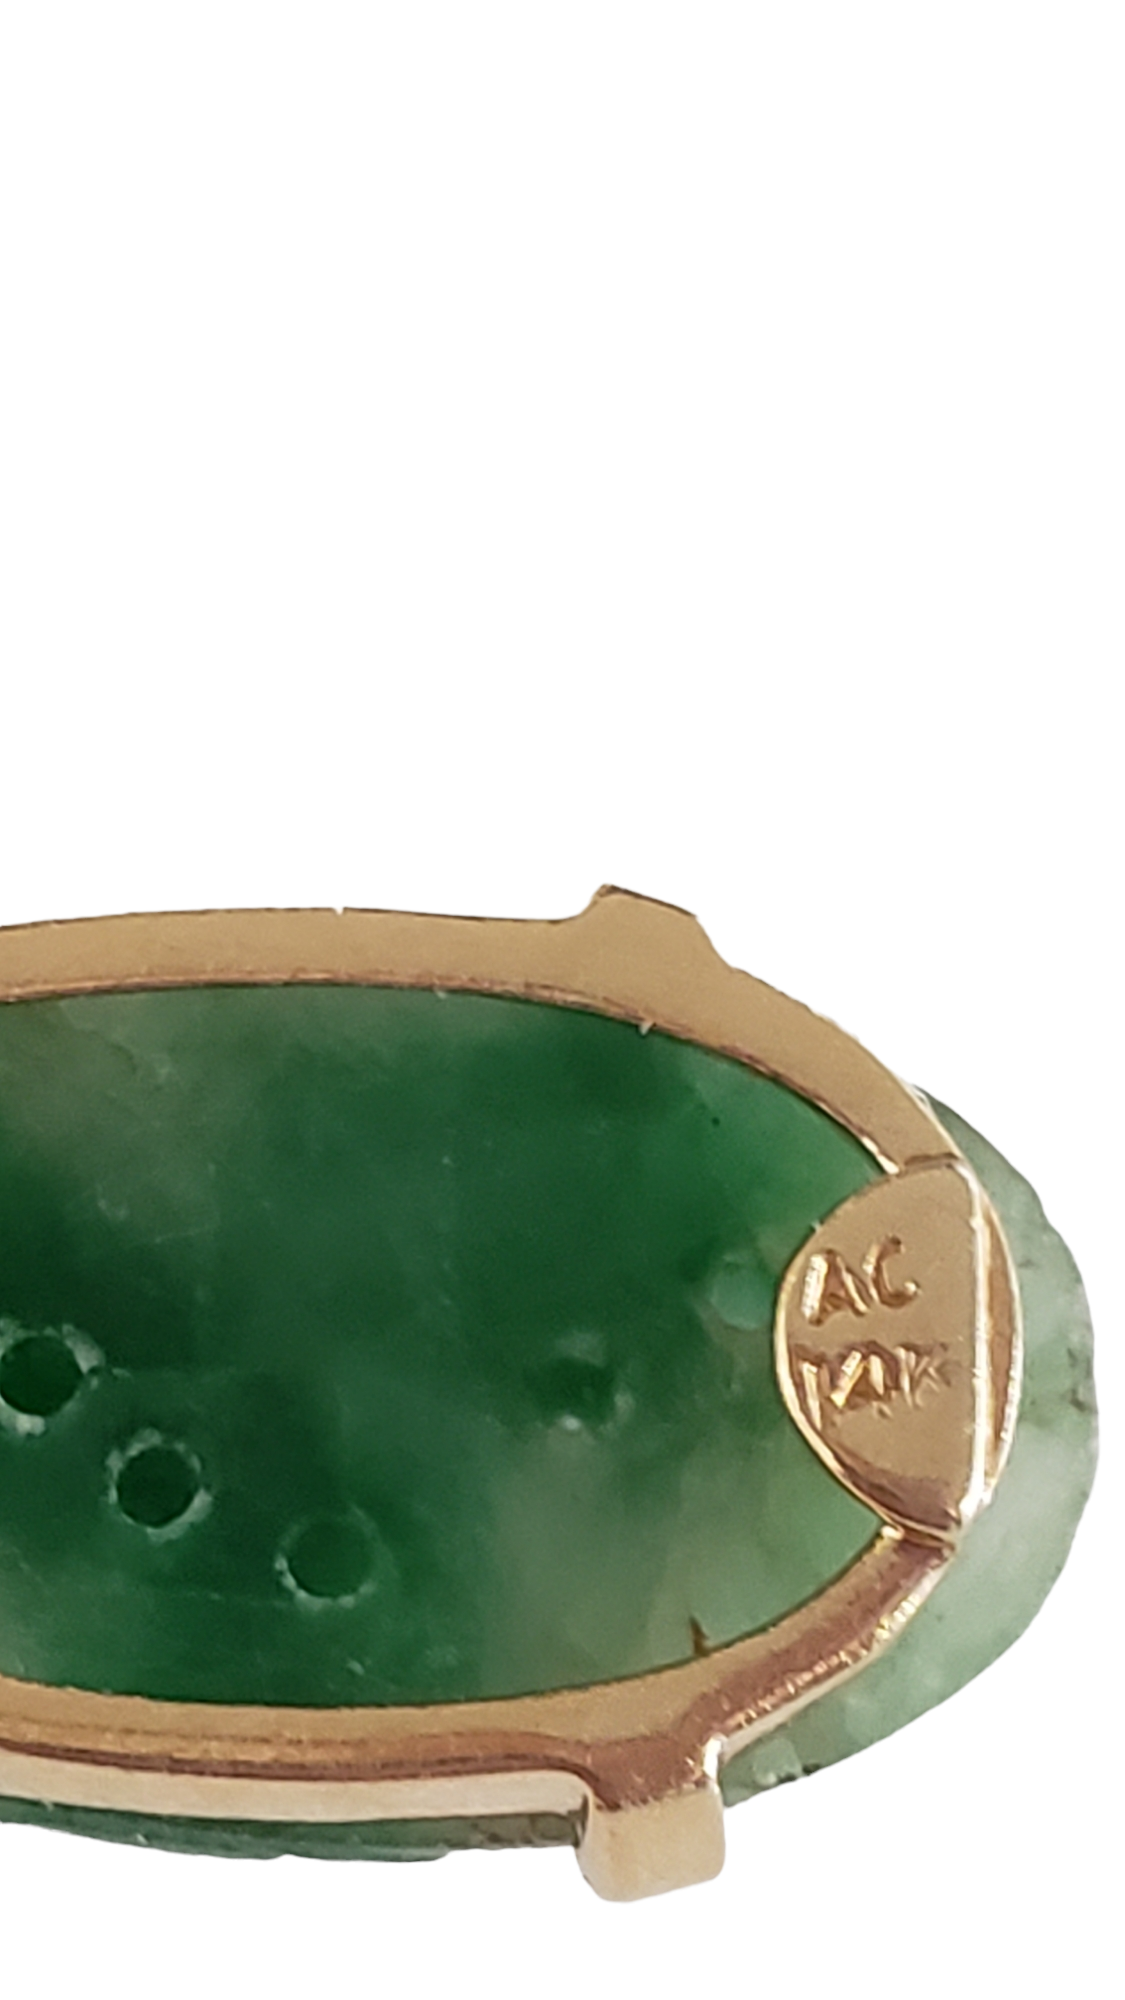 Carved Jade Necklace, 14kt Yellow Gold